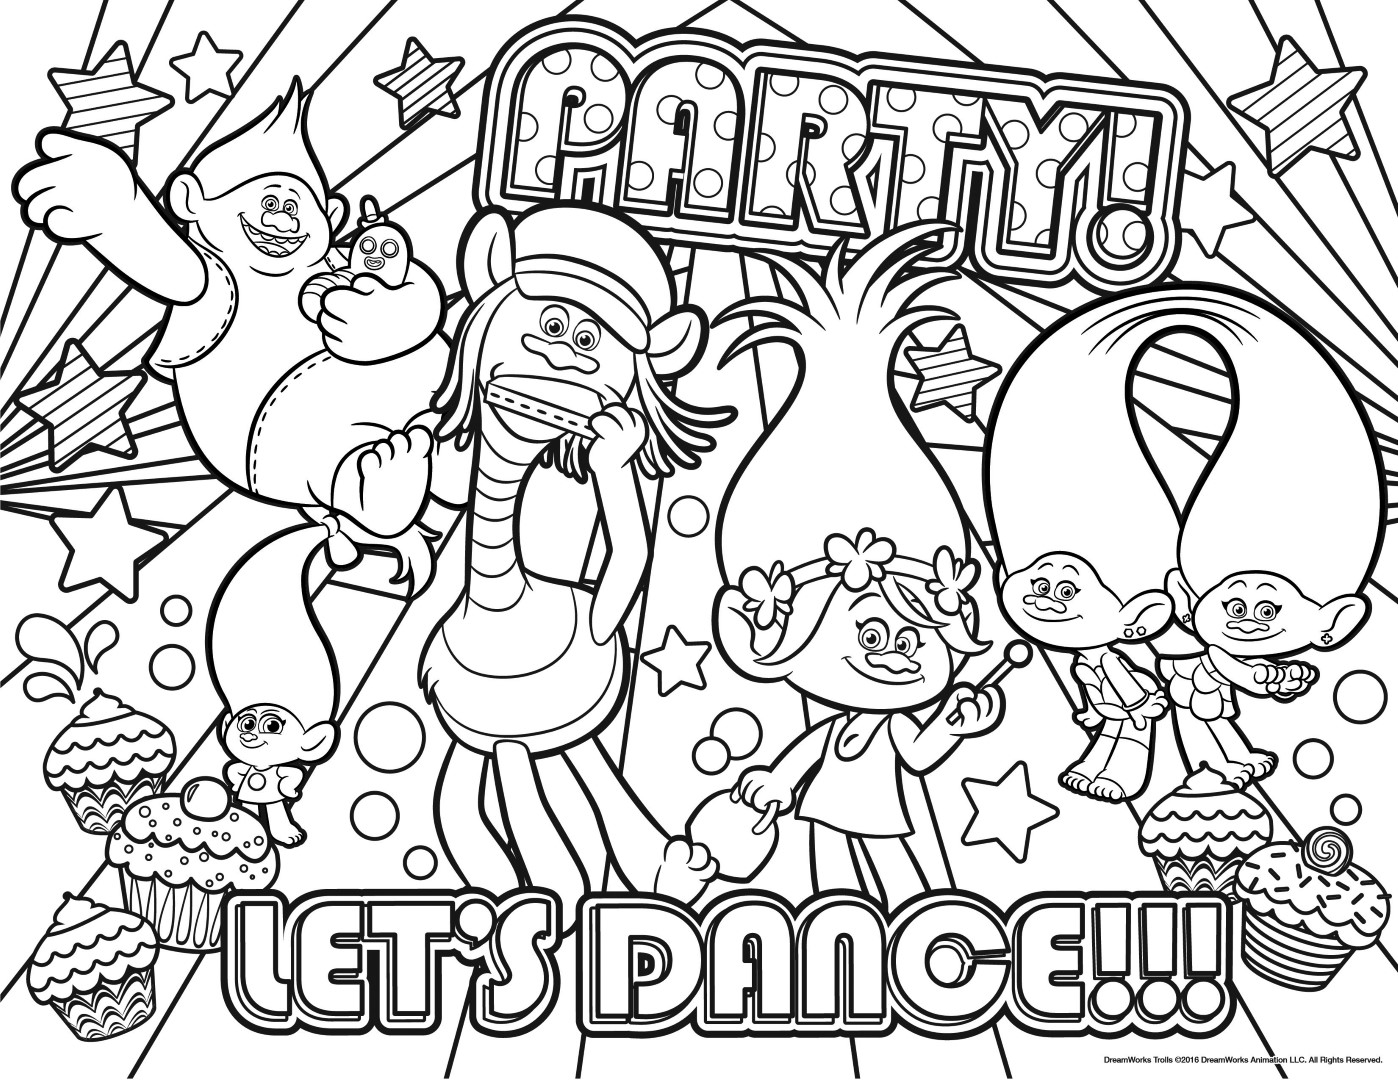 Dance Trolls Coloring Pages